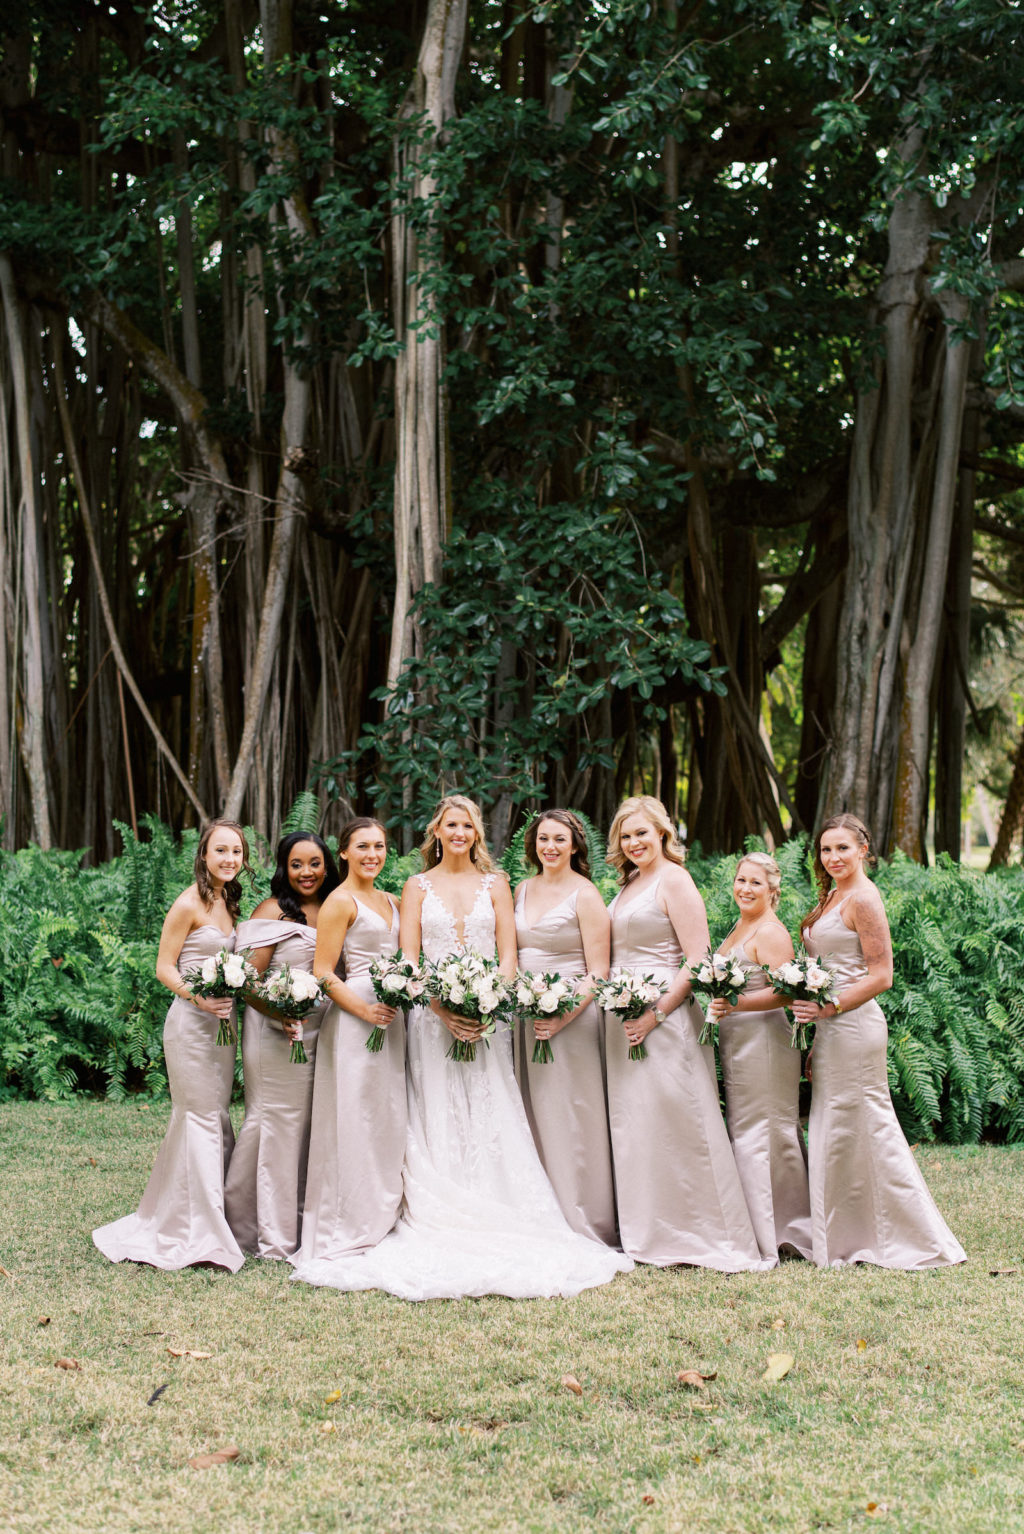 Modern Day Fairytale Florida Bridal Party, Bride Wearing Galia Lahav Wedding Dress Holding White Floral and Ivory Rose Bouquet with Greenery, Bridesmaids in Blush Satin Hayley Paige Occasions Long Mix and Match Dresses | Tampa Dress Shop Isabel O’Neil Bridal | Sarasota Hair and Makeup by Femme Akoi Beauty Studios | Sarasota Wedding Planner NK Weddings | Tampa Bay Bridesmaid Dress Shop Bella Bridesmaids Tampa